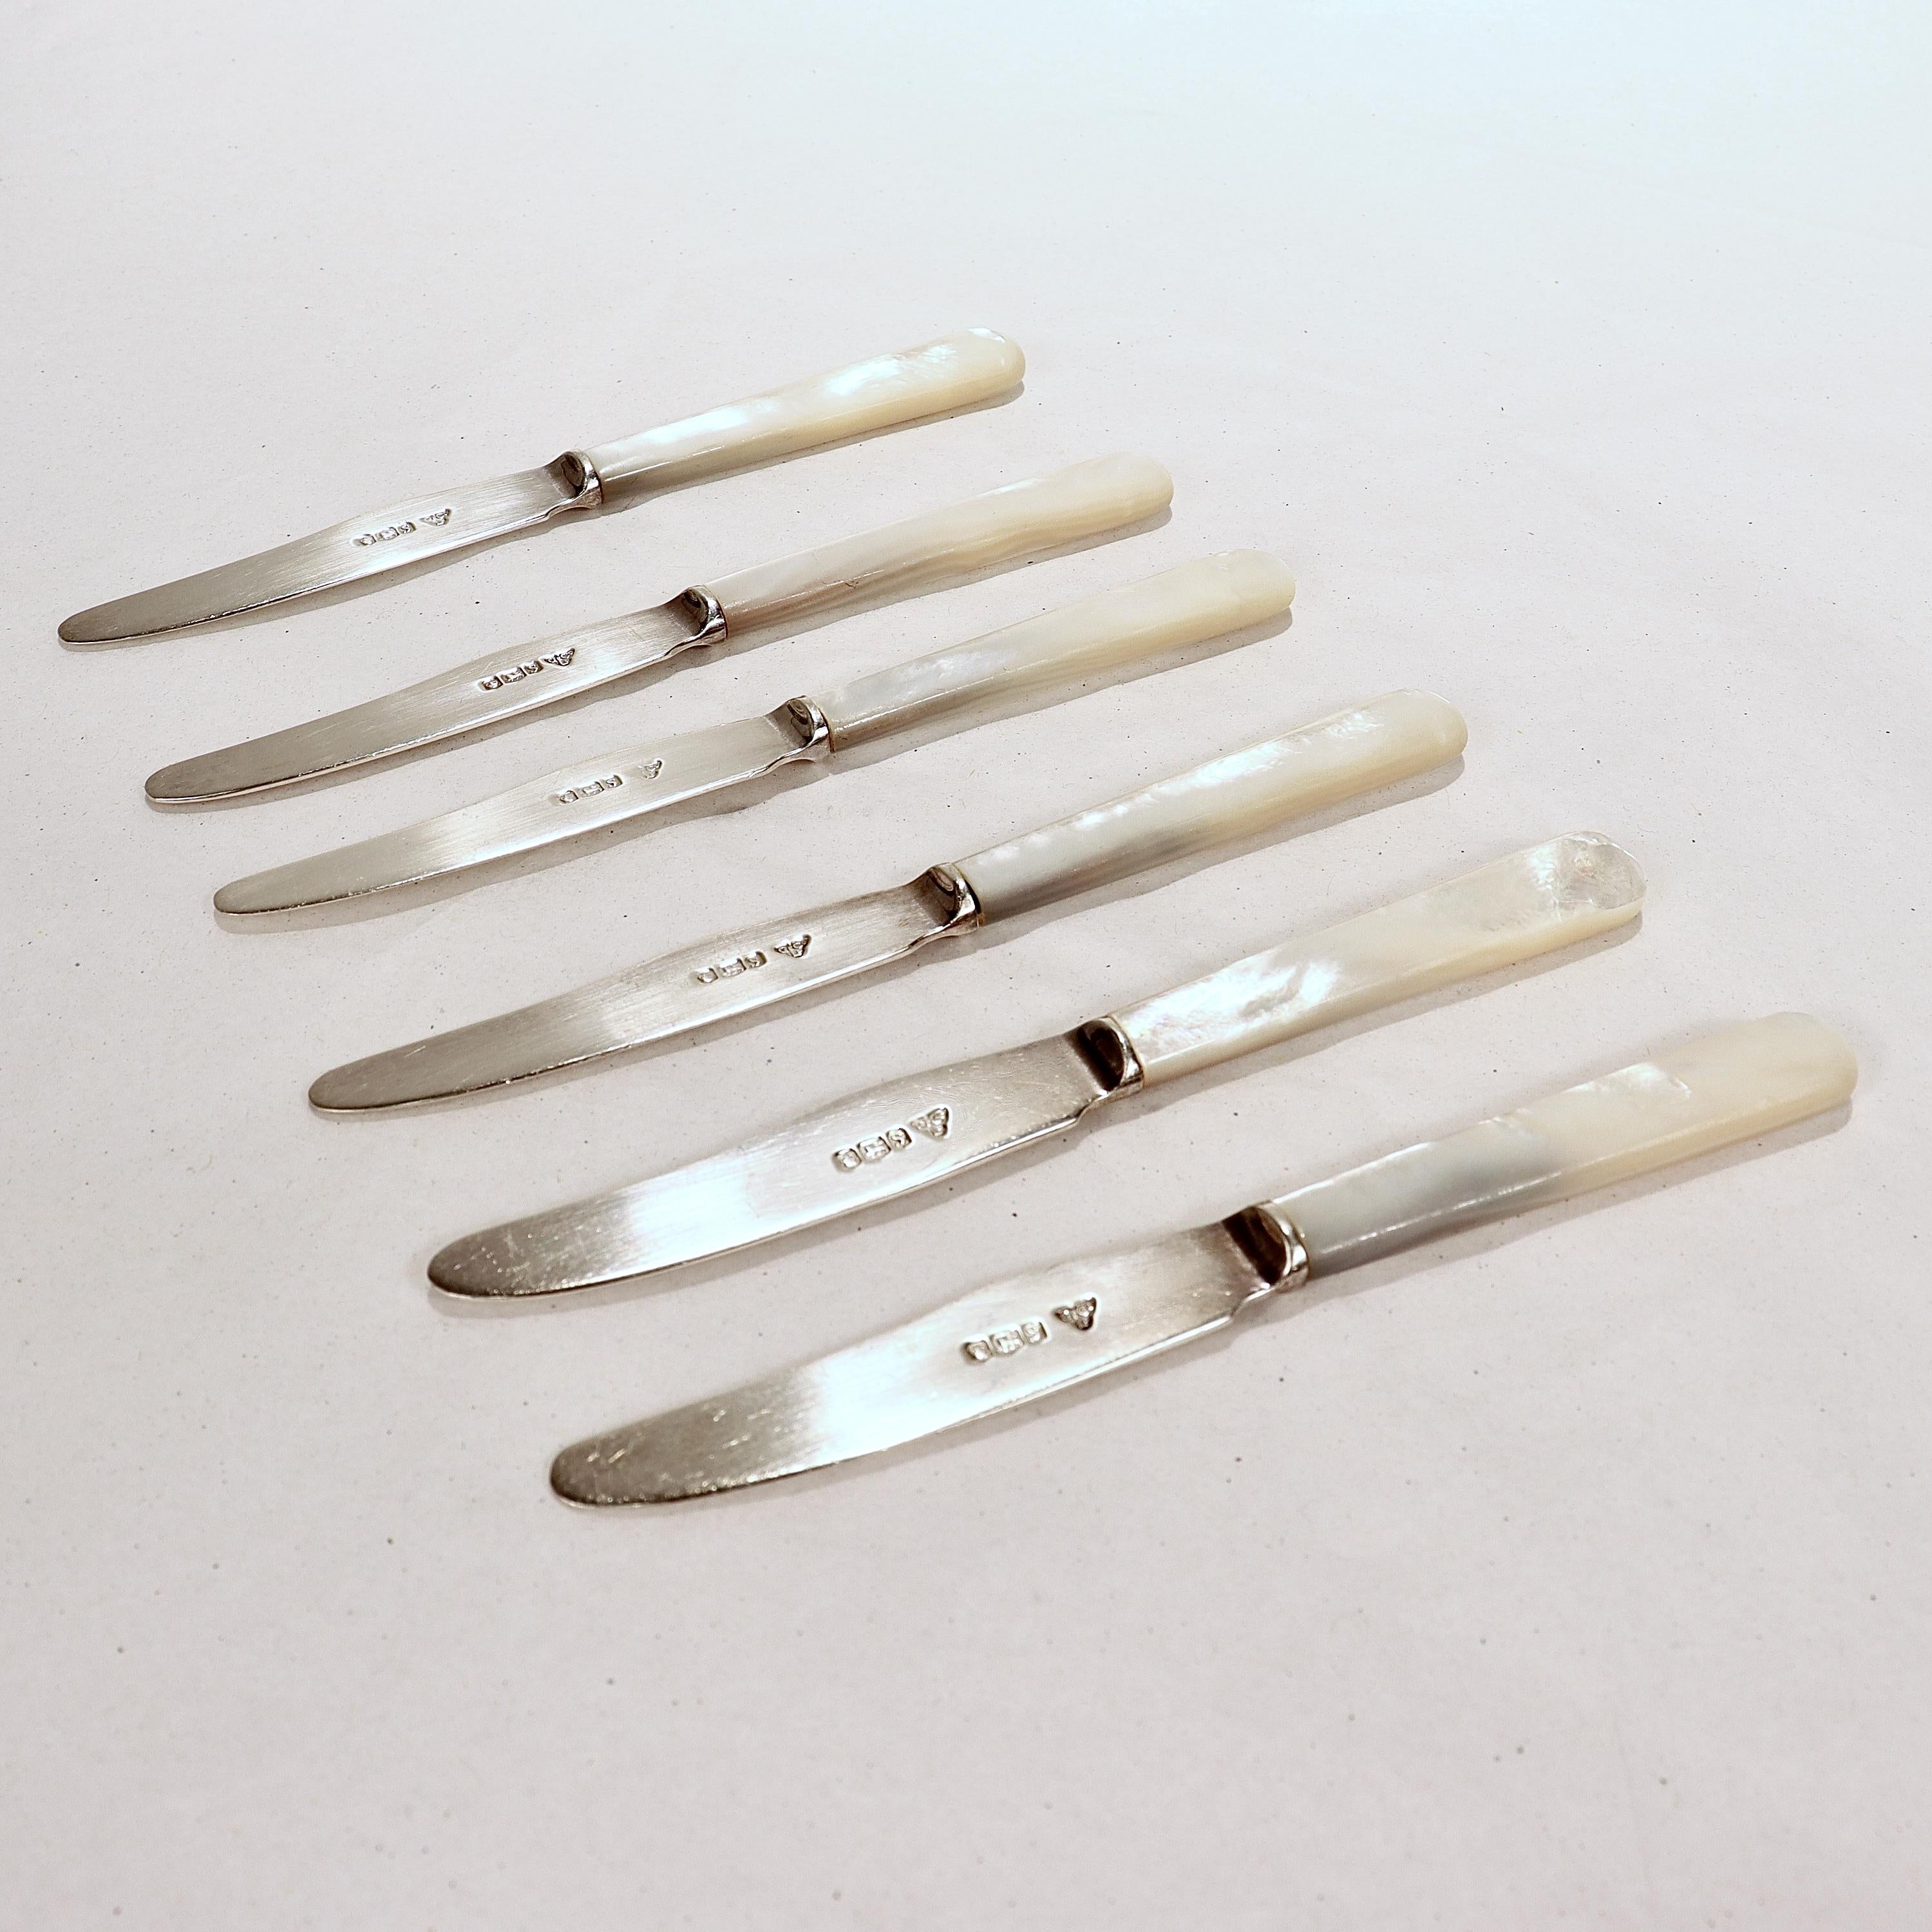 A very fine boxed set of caviar knives.

By Garrard & Co. 

The blades in sterling silver and the handles made of lustrous Mother-of-Pearl. 

Founded in 1722, Garrard was made the first ever Crown Jewelers for the English throne and held that